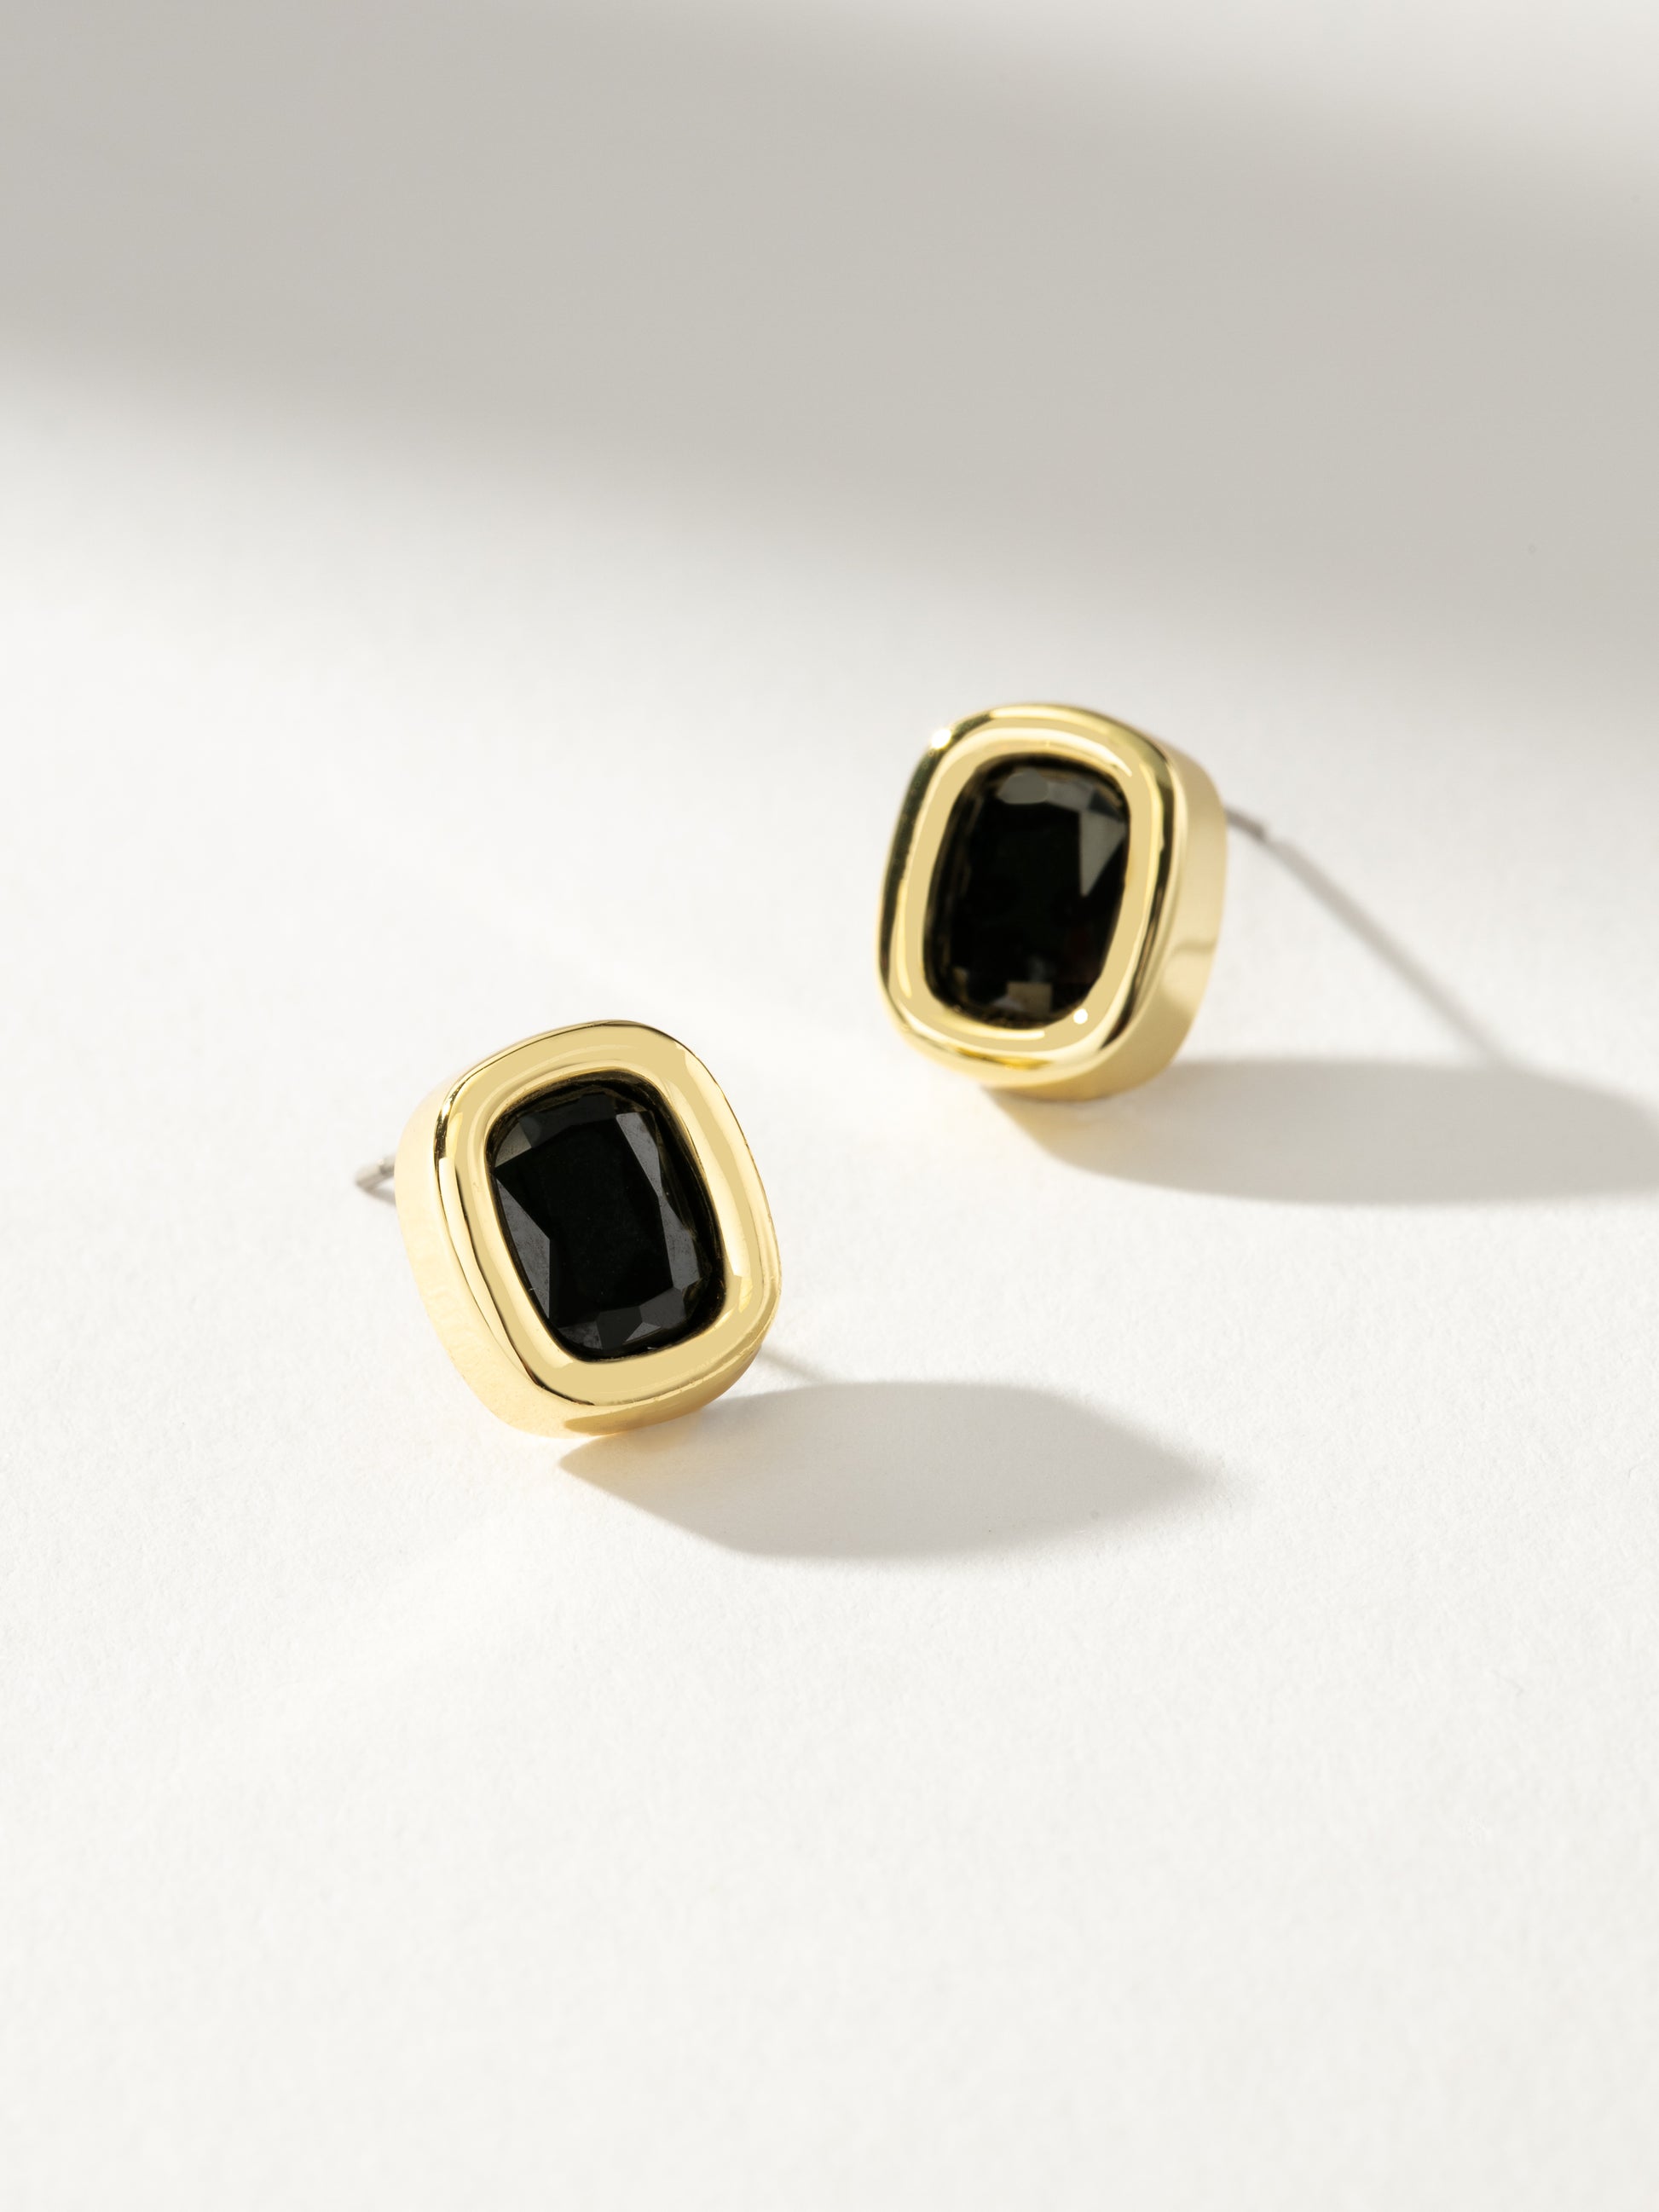 Haute Earrings | Gold | Product Image | Uncommon James